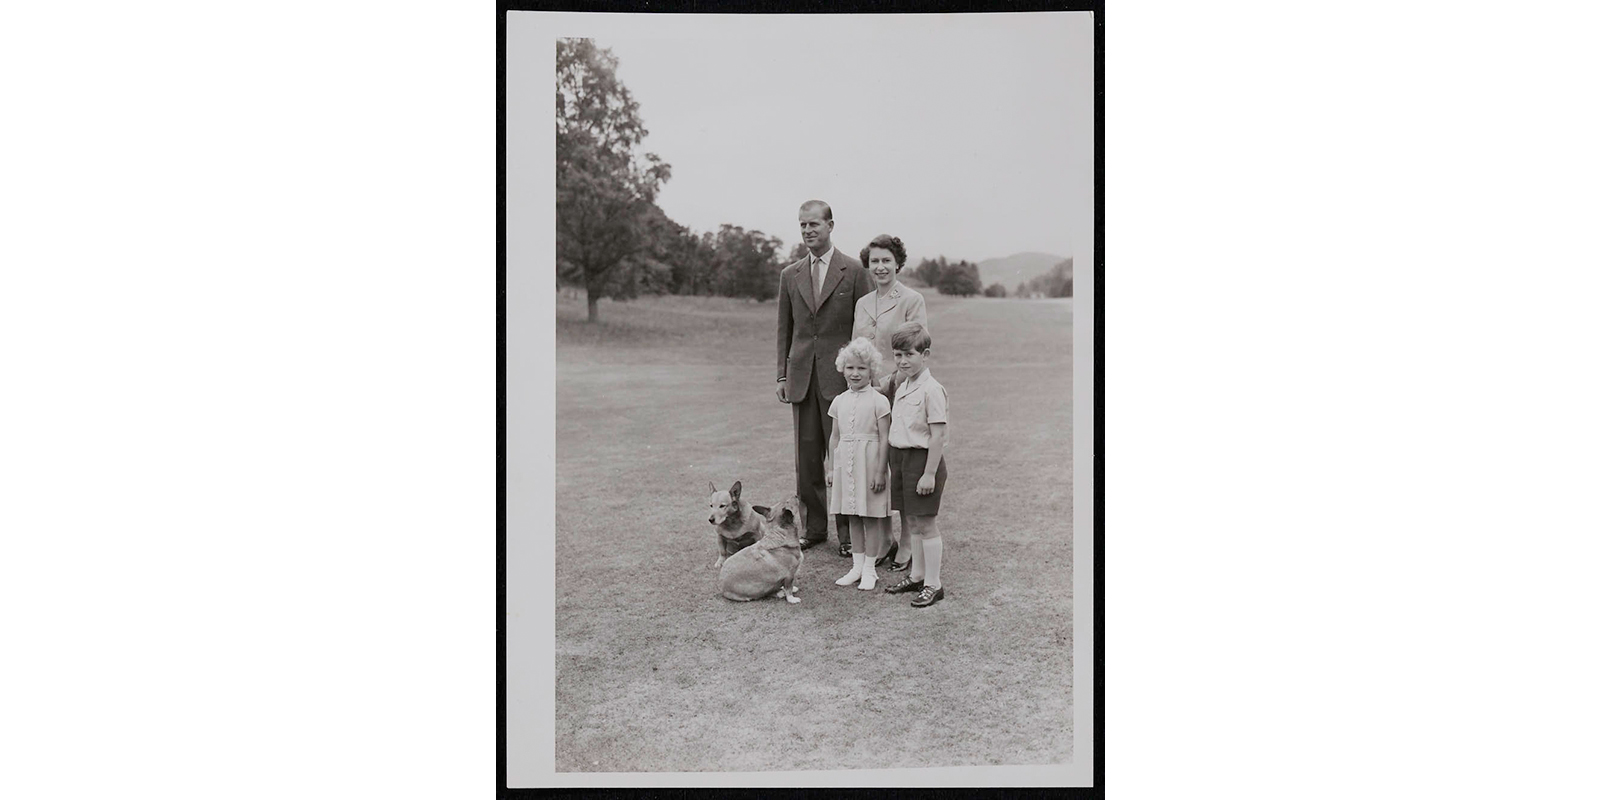 (left to right) Prince Philip and Queen Elizabeth II, with Princess Anne and Prince Charles standing in front of them. The four are posing for a photo in an open field. There are trees behind them in the distance, and two corgis at Philip’s feet. Elizabeth, Anne and Charles are looking at the camera, while Philip looks straight ahead.